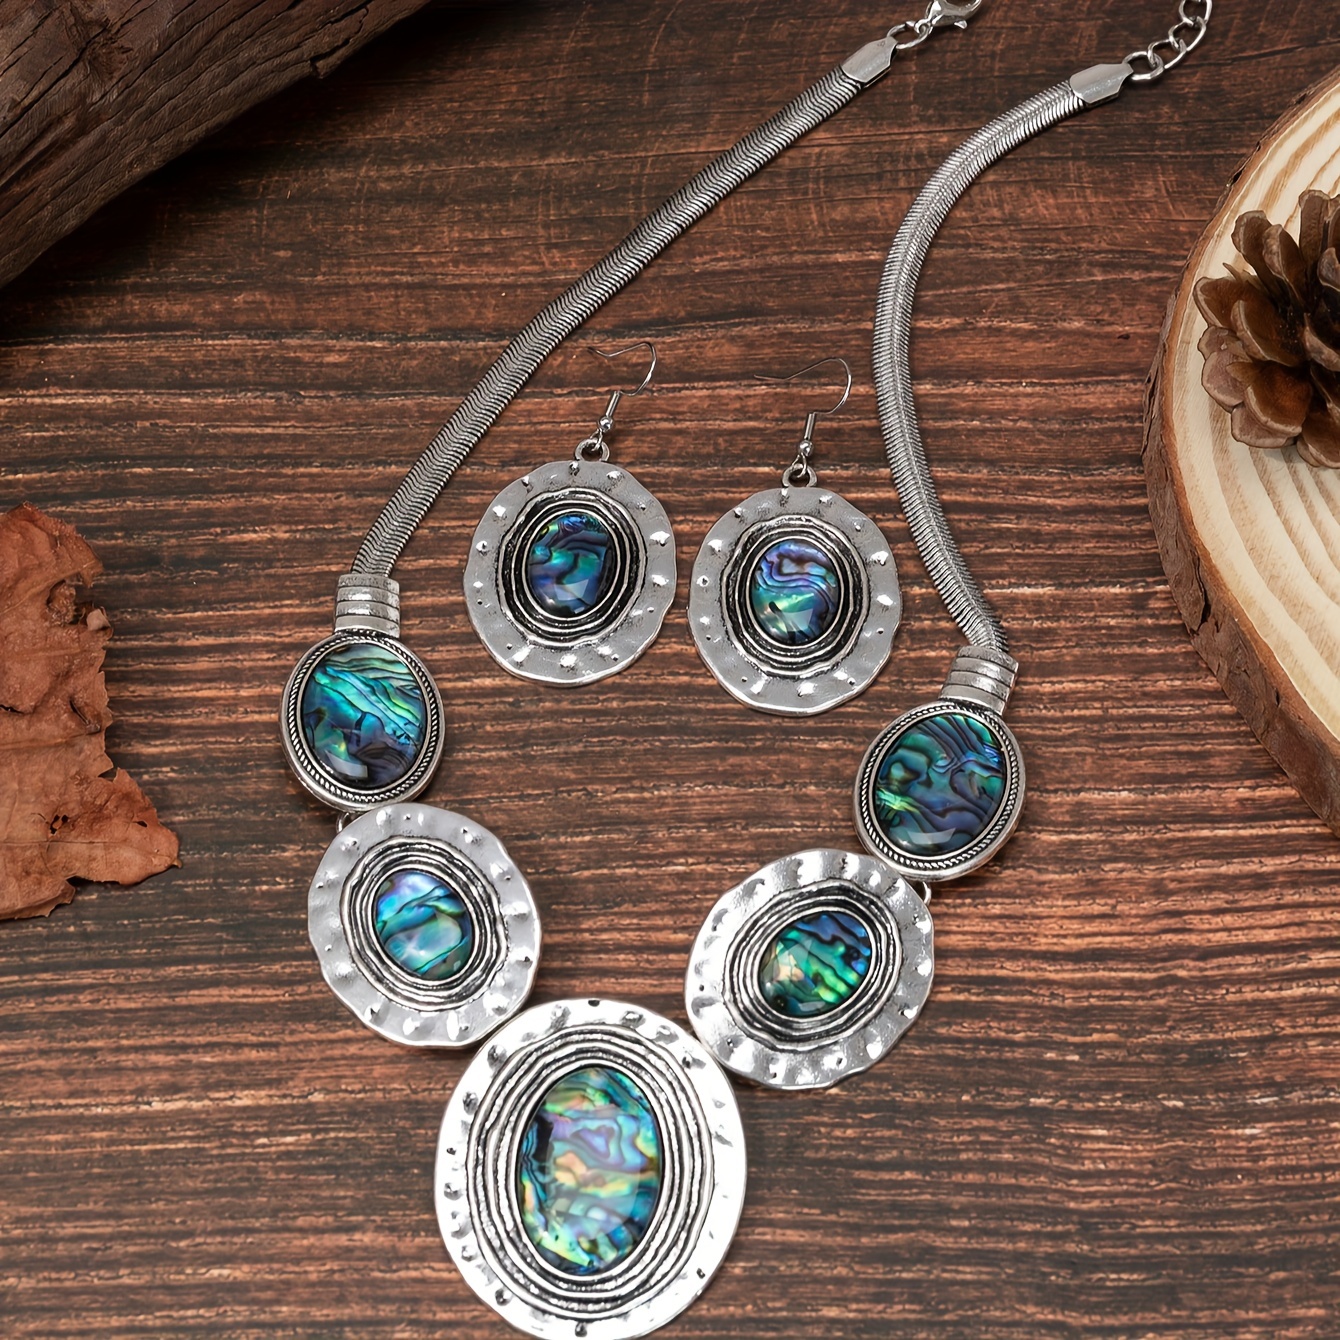 

3pcs Earrings Plus Necklace Boho Style Jewelry Set Silver Plated Inlaid Abalone Shell Reflecting Colorful Lights Match Daily Outfits